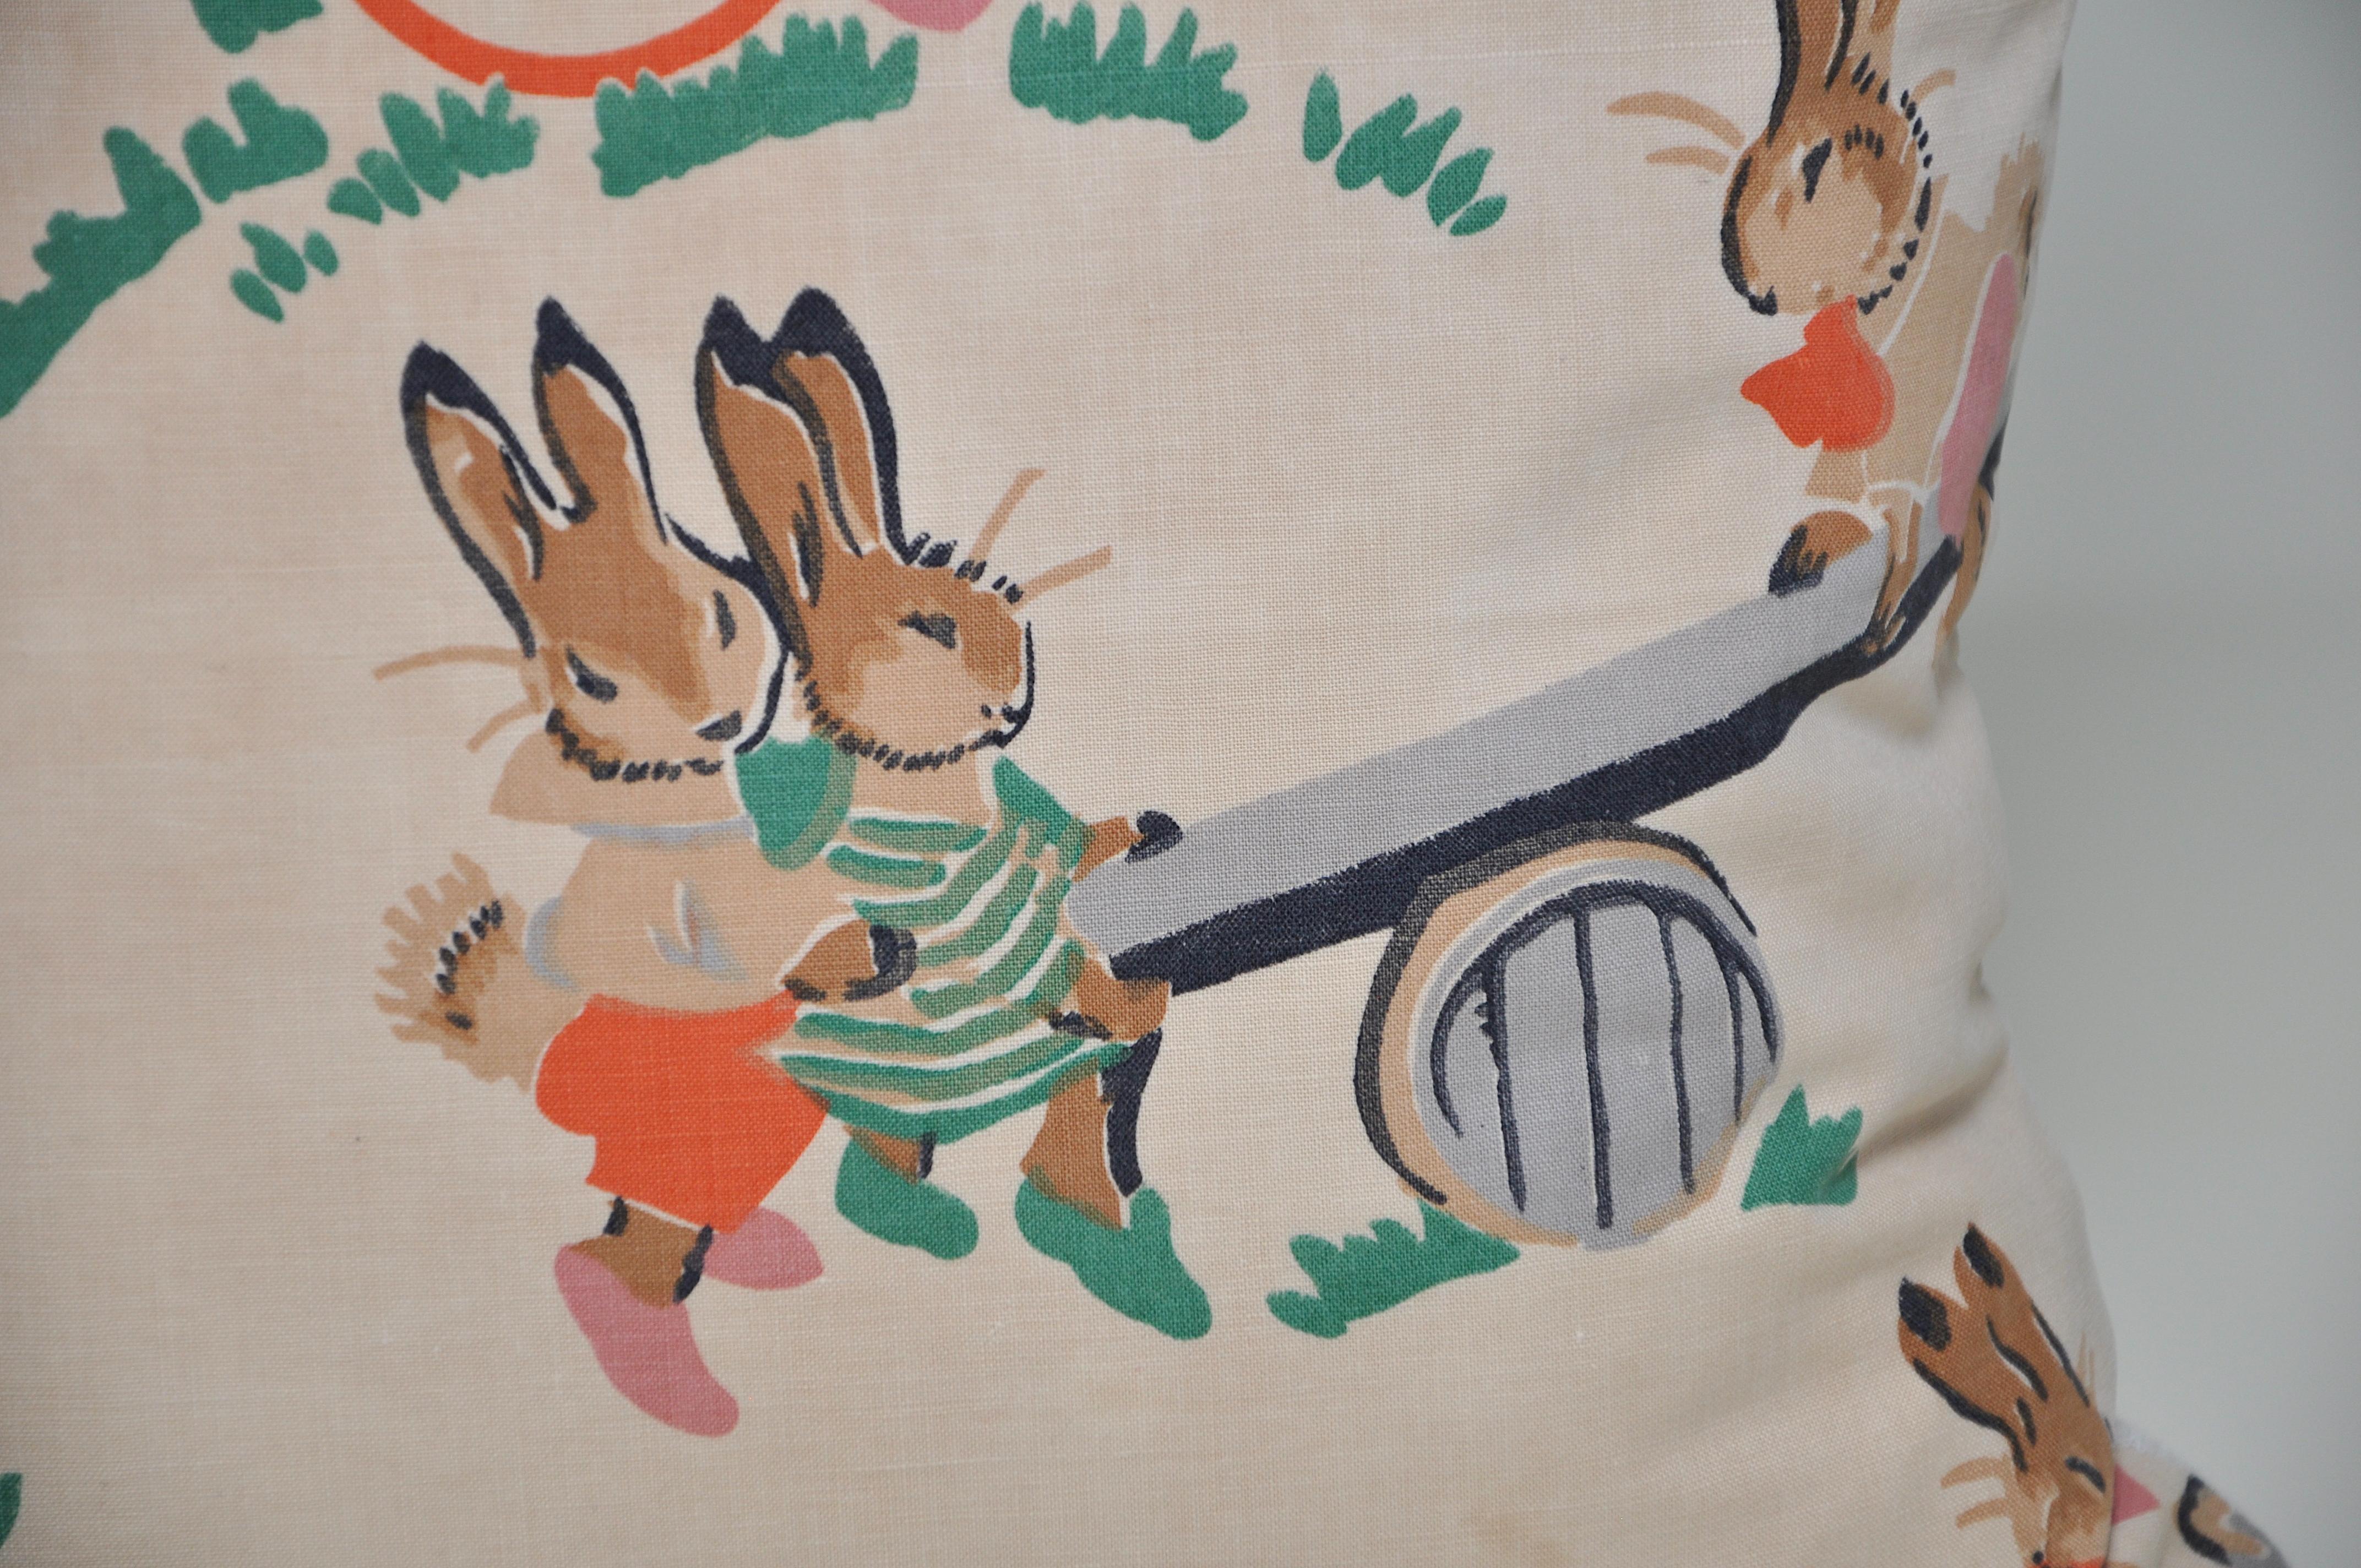 Custom-made one-of-a-kind luxury cushion created from an exquisite piece of rare antique fabric. Depicting gorgeous anthropomorphic rabbits, reminiscent of Alan Wright’s 1930s ‘Bunnykins’ which and Beatrix Potter’s ‘turn of the century Peter